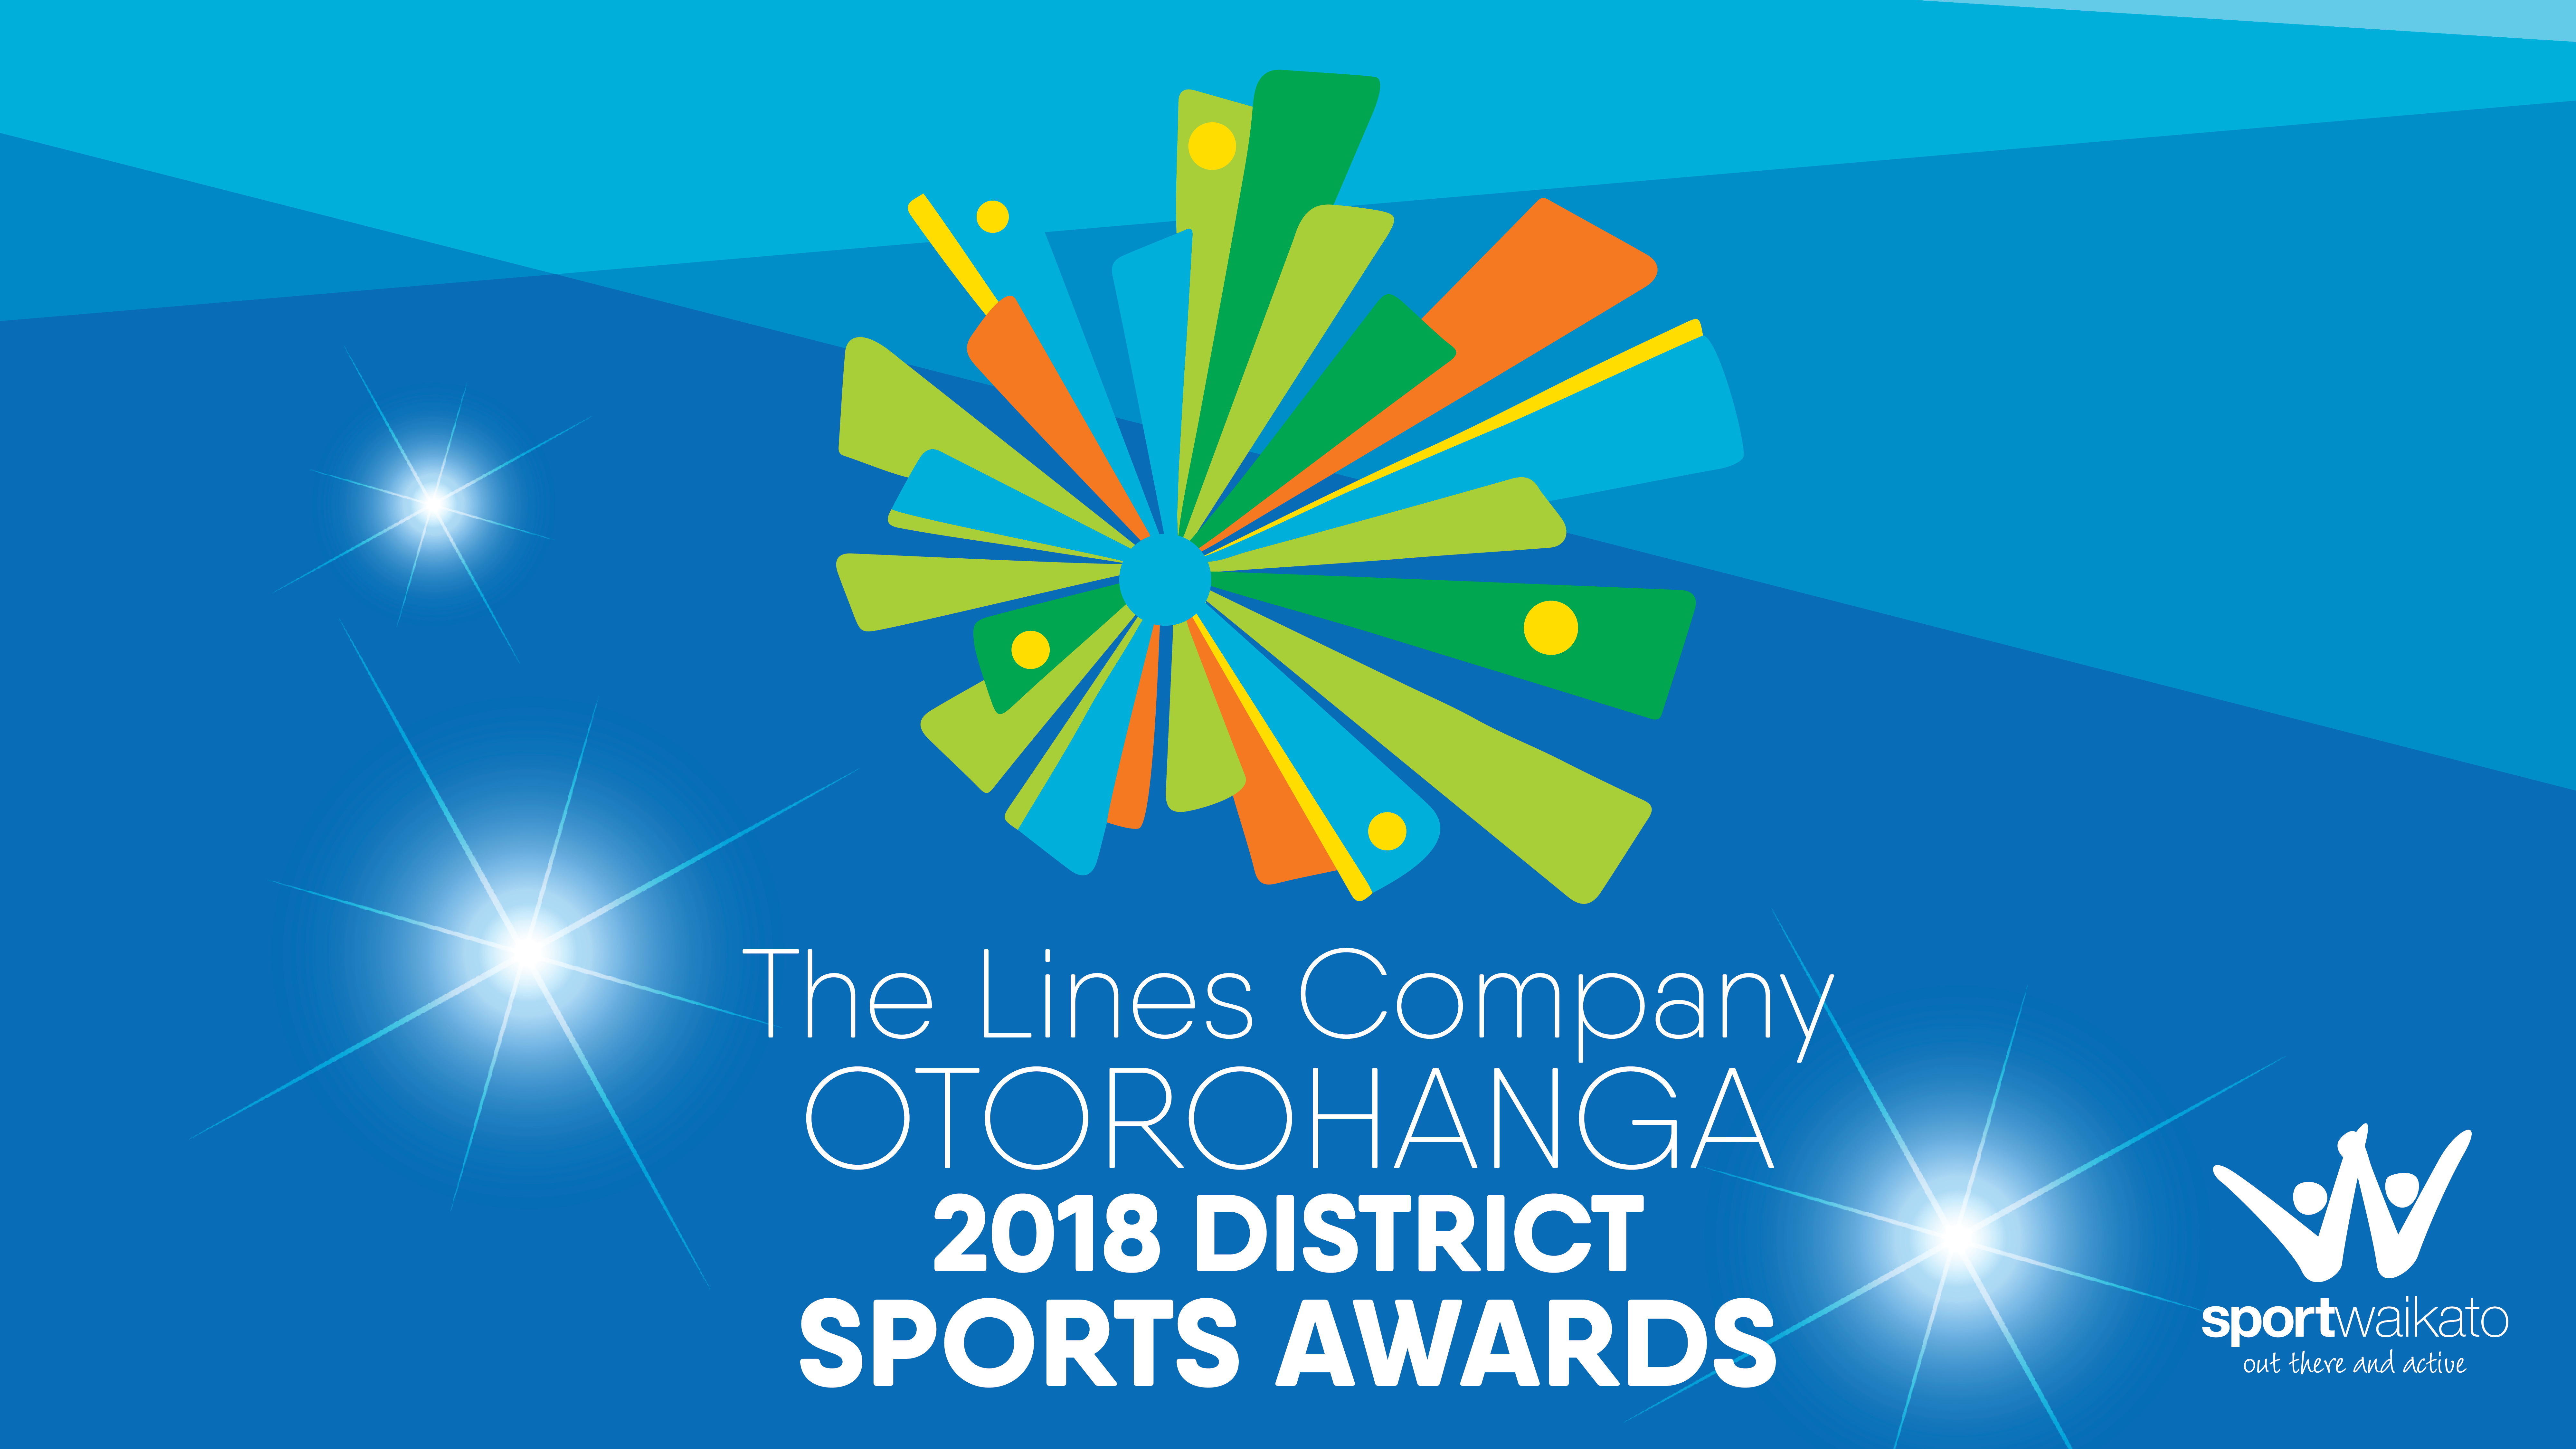 The Lines Company Otorohanga District Sports Awards nominations are in!